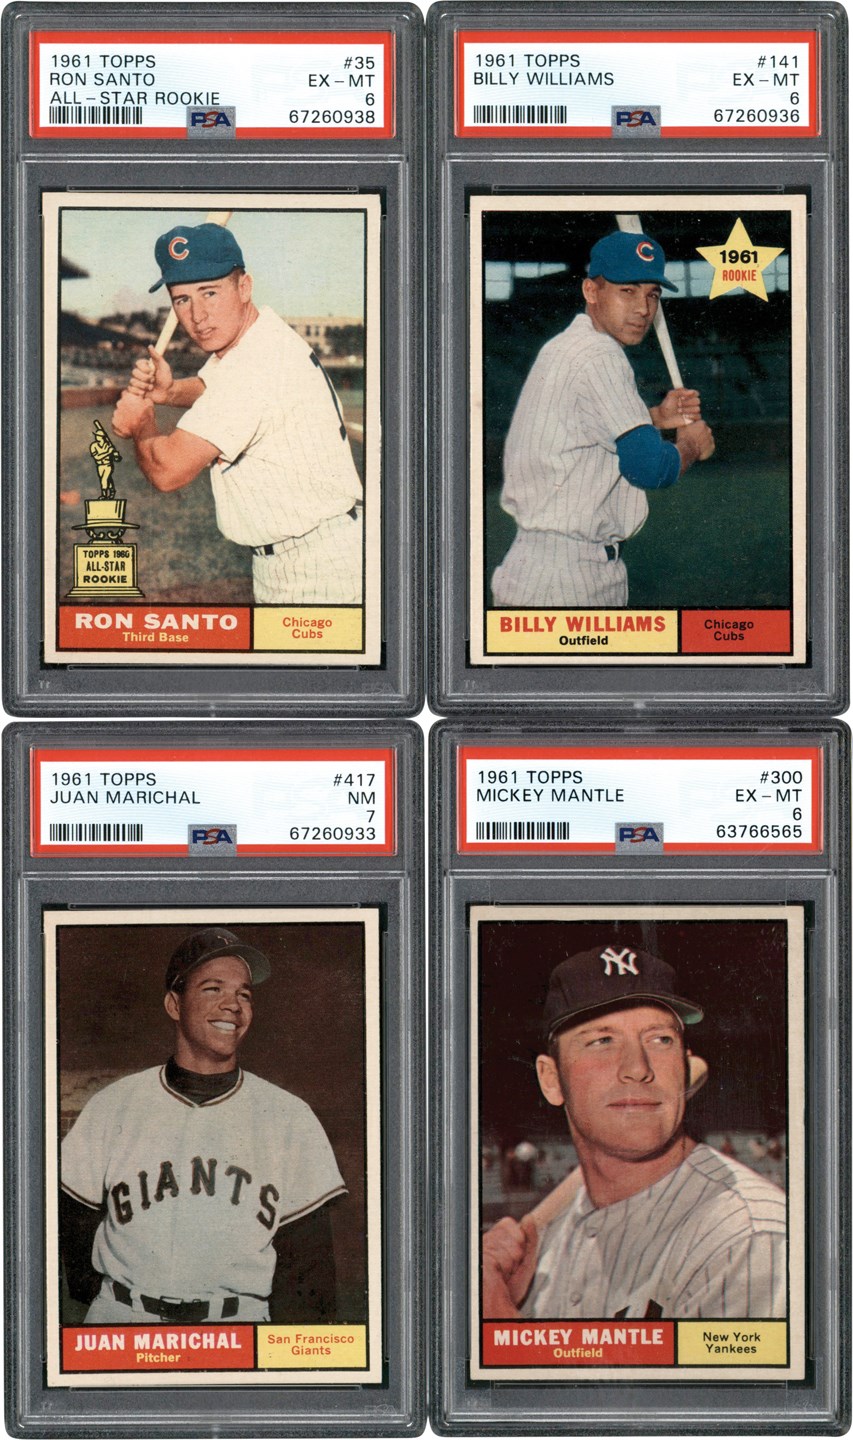 - 1961 Topps Near-Complete Set w/PSA 6 Mickey Mantle (587/589)